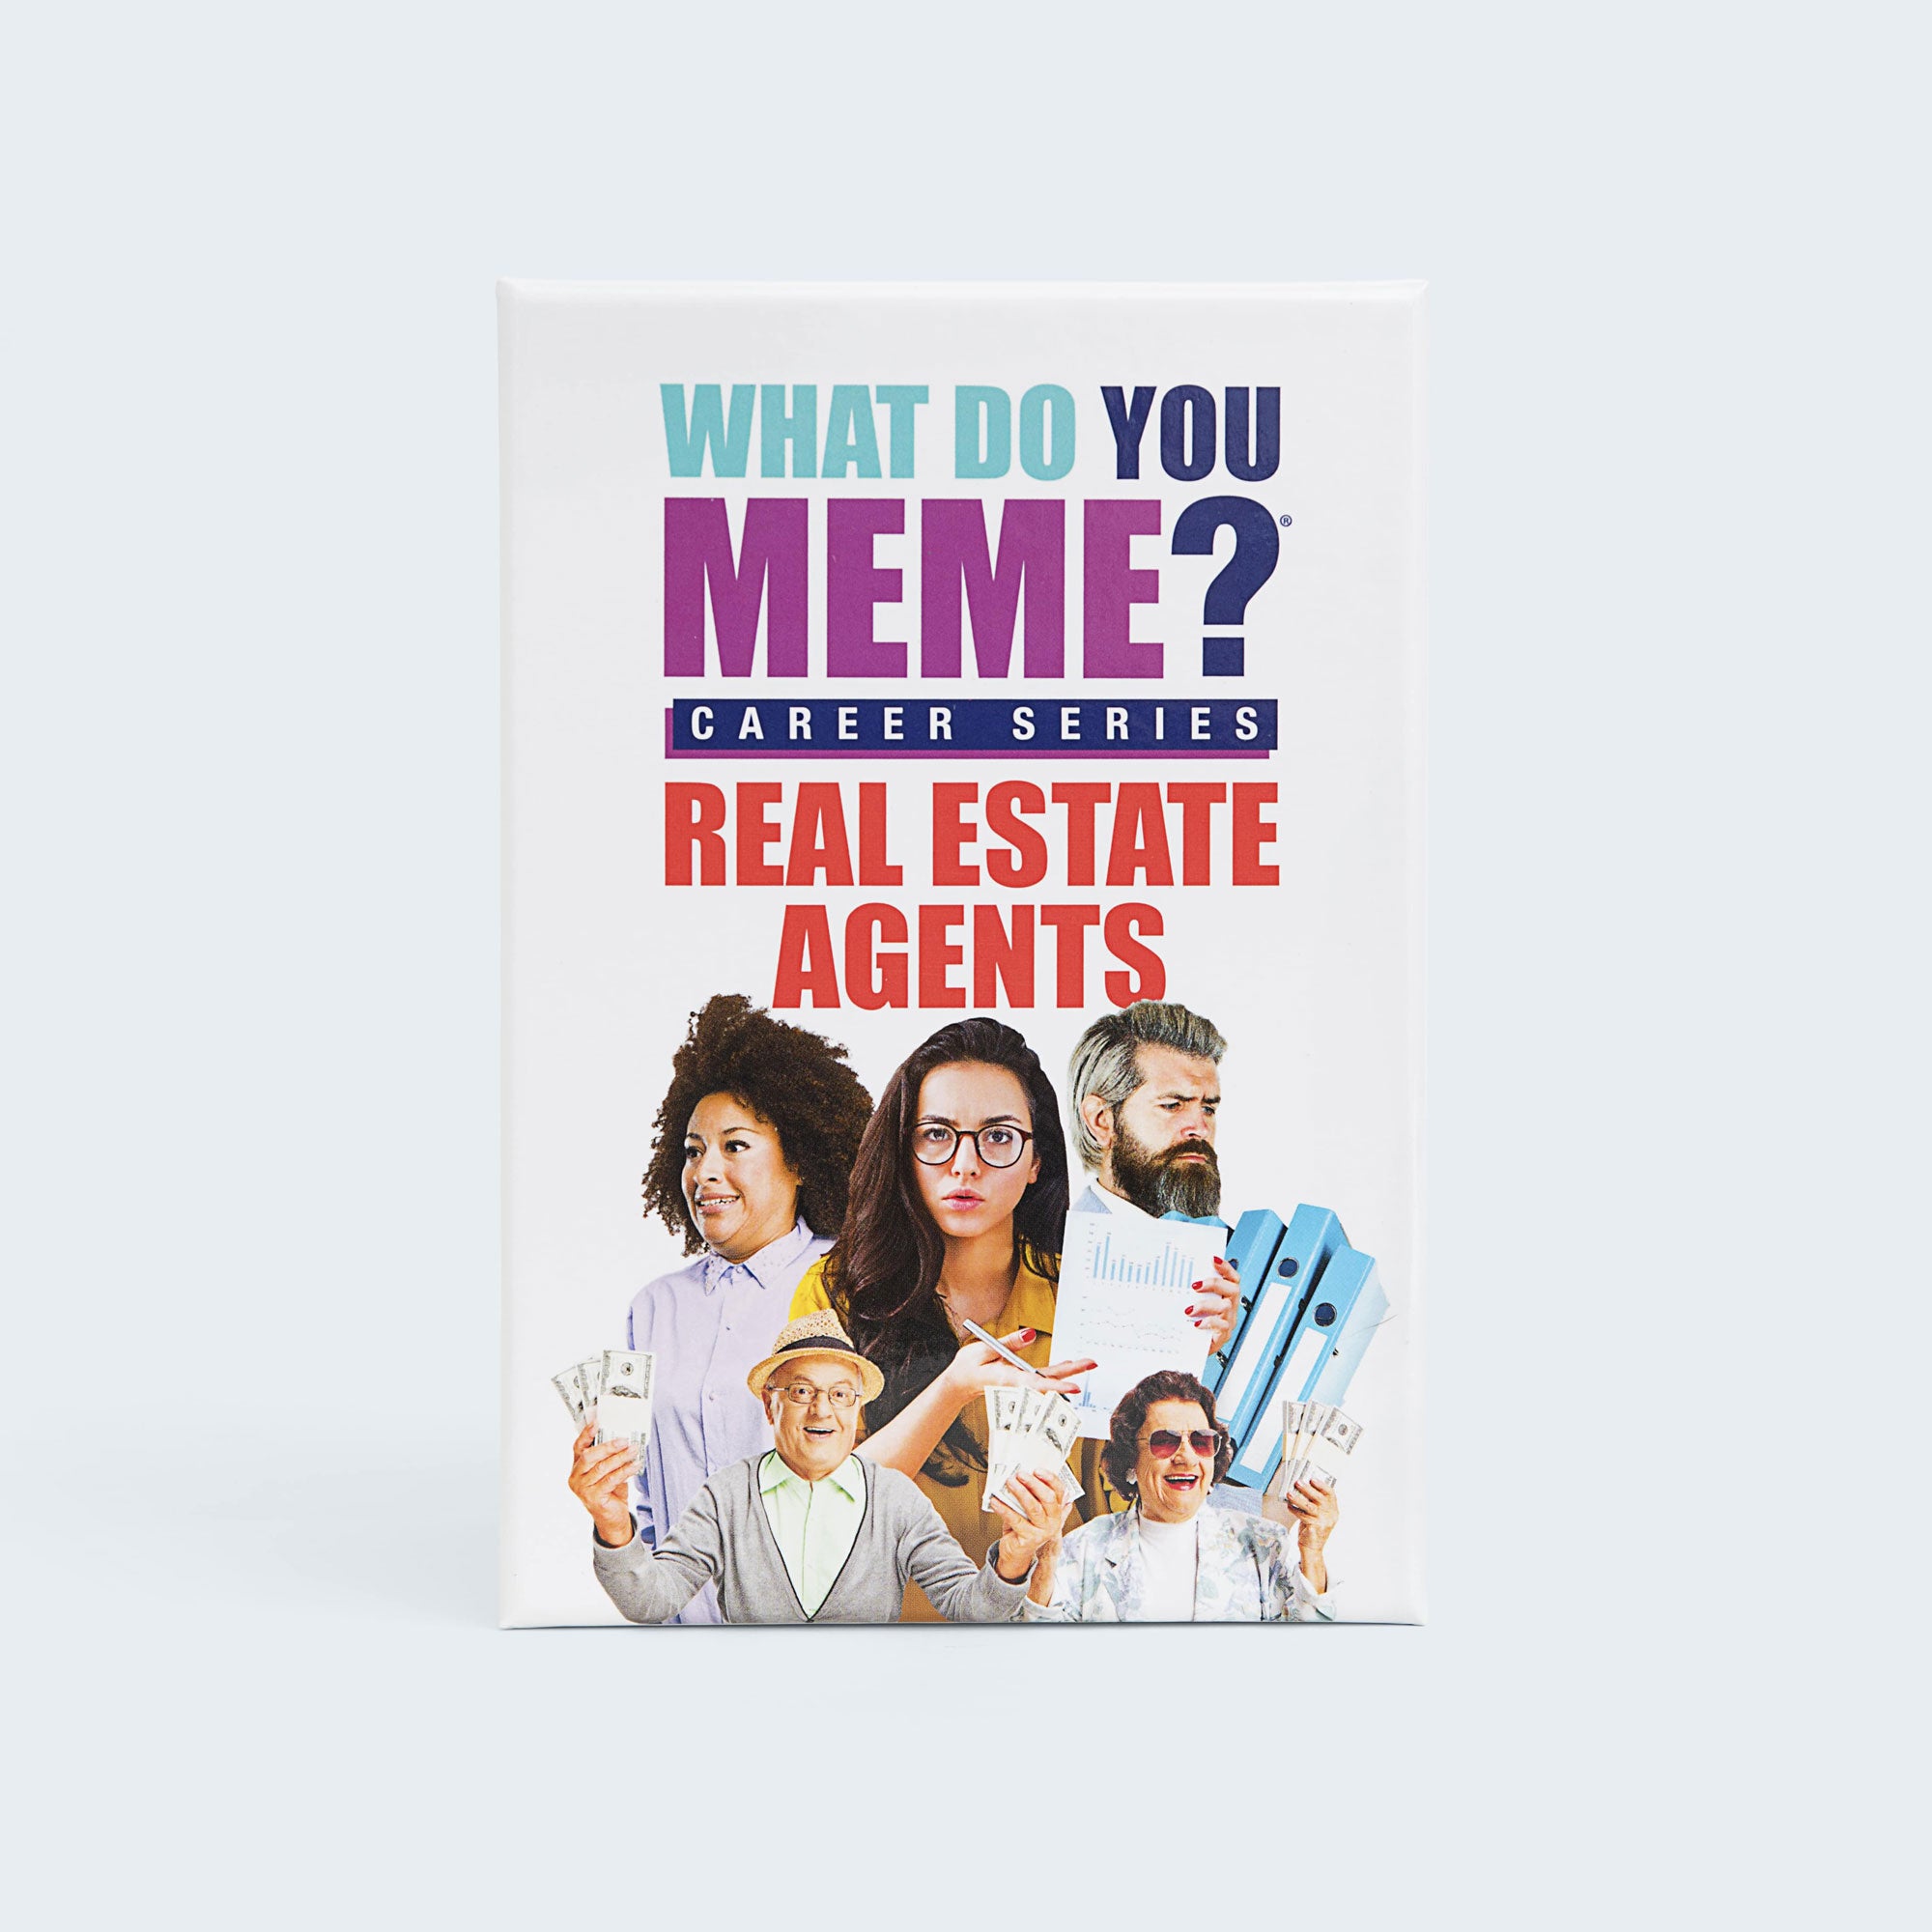 what-do-you-meme-career-series-real-estate-agents-game-box-and-game-play-04-what-do-you-meme-by-relatable